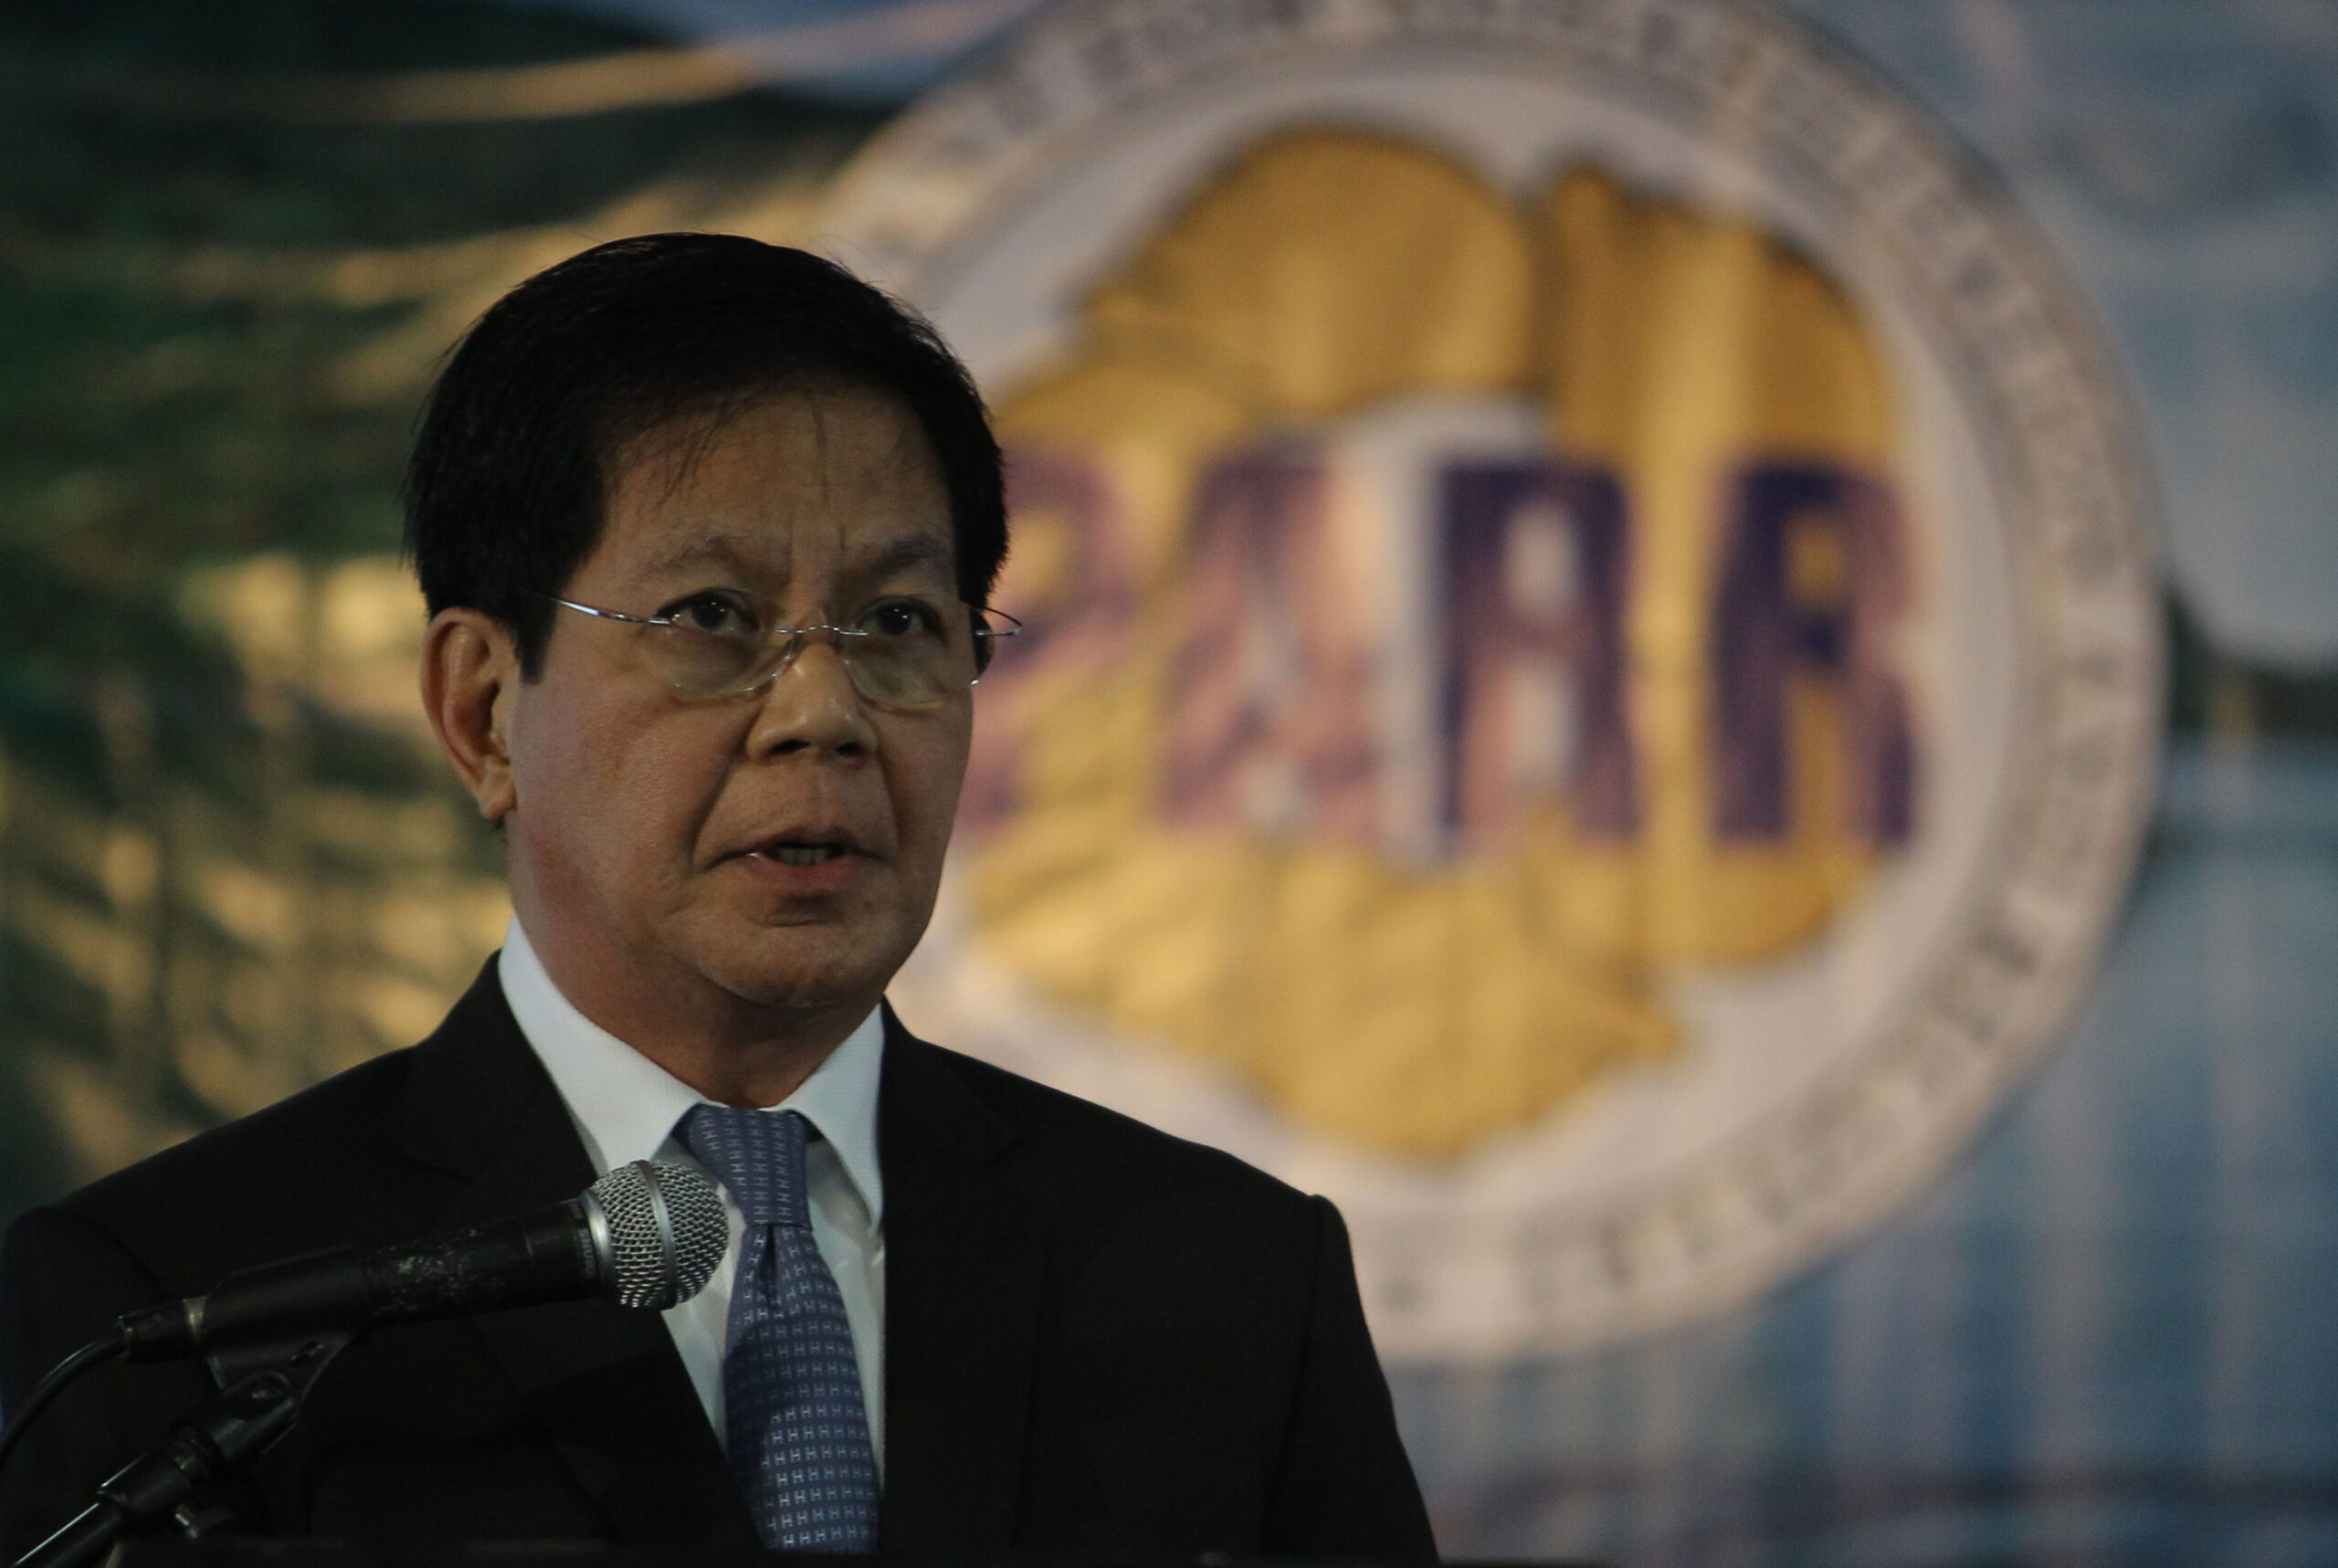 ‘Lacson for president’ video posted on Facebook